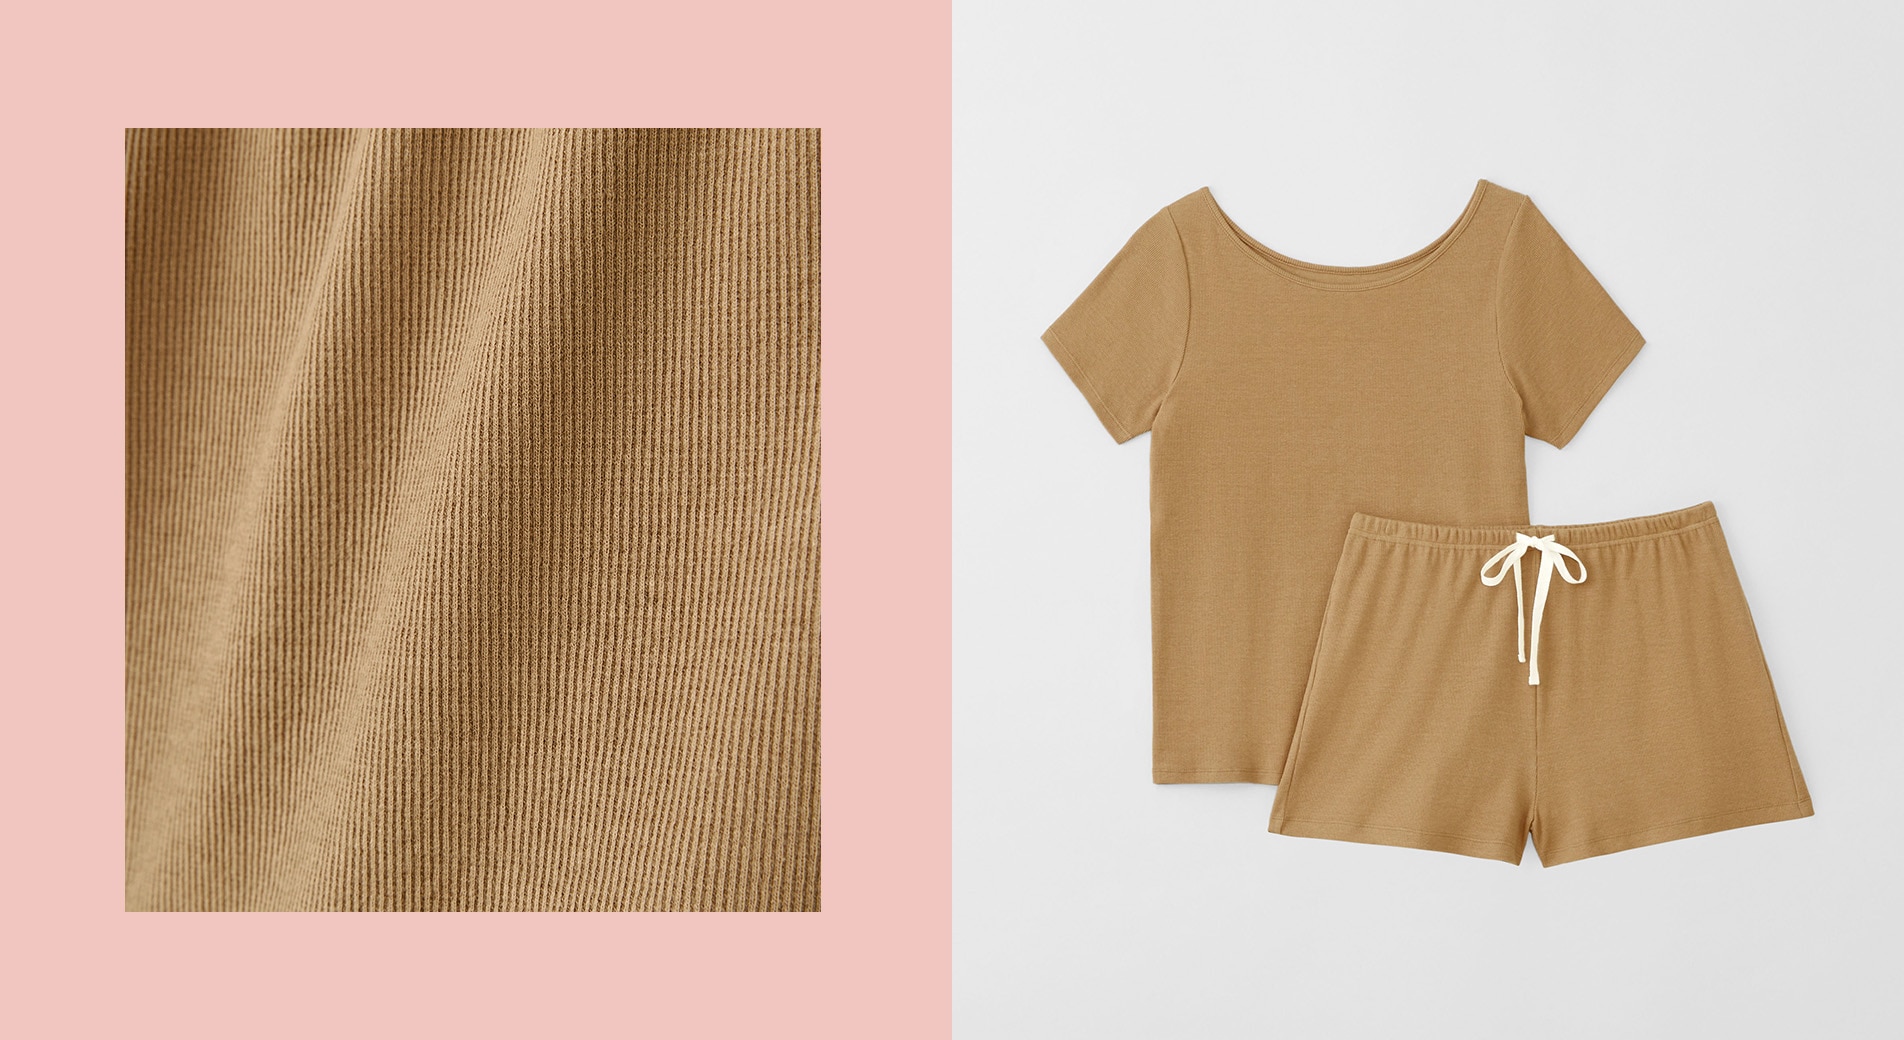 split image. left side: close up of ribbed fabric, in the colour chair. pink border surrounds square image. right side: flay lay of the leyna sleep set, a ribbed brown tshirt and shorts with white drawstring.